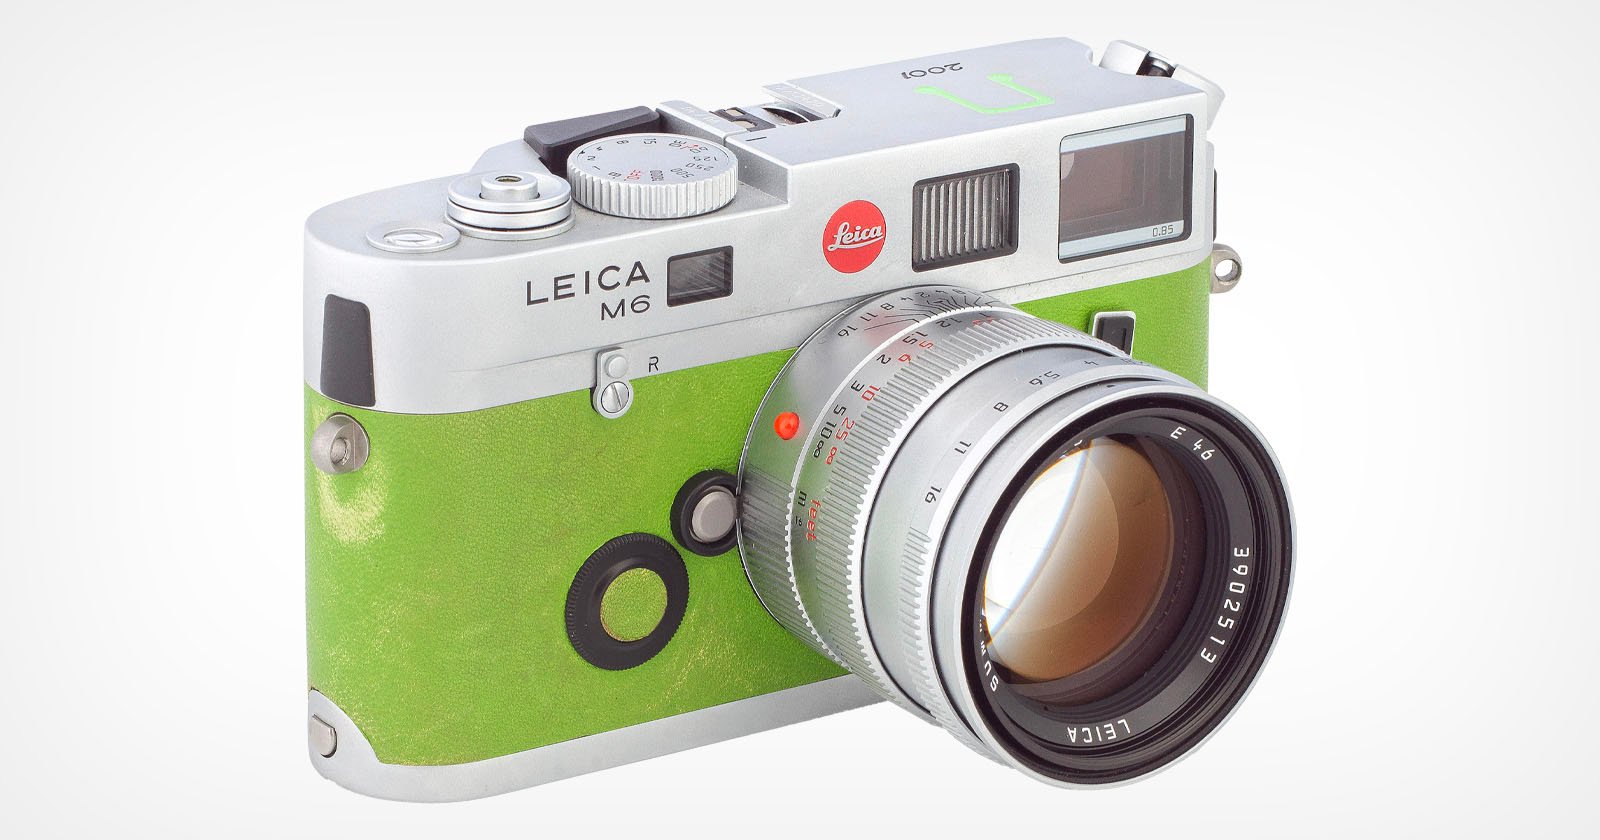 Rare Lime Green Leica Up for Sale Is a Vibrant Part of Photographic History